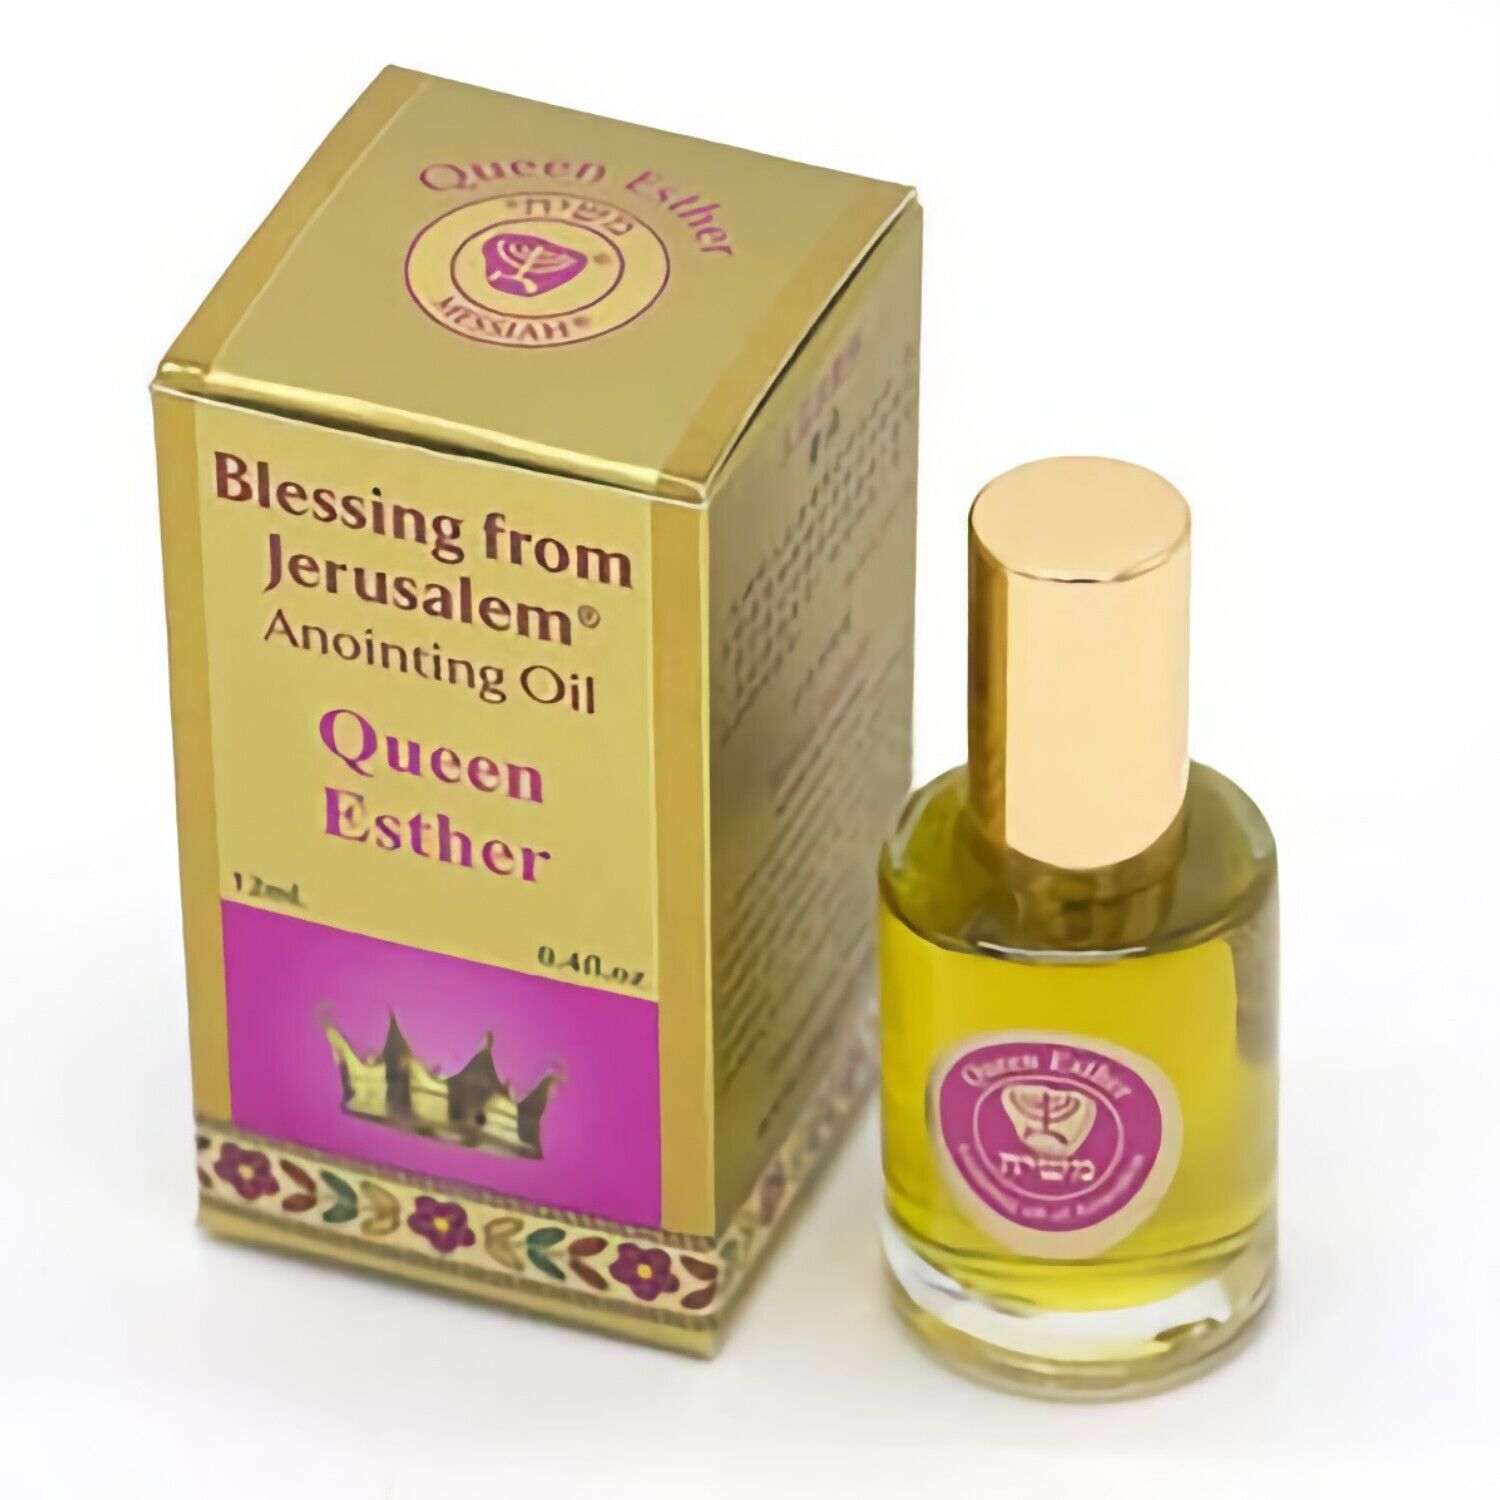 Gold Anointing Holy Oil Queen Esther Bottle 12 ml / 0.4 fl.oz. from Jerusalem